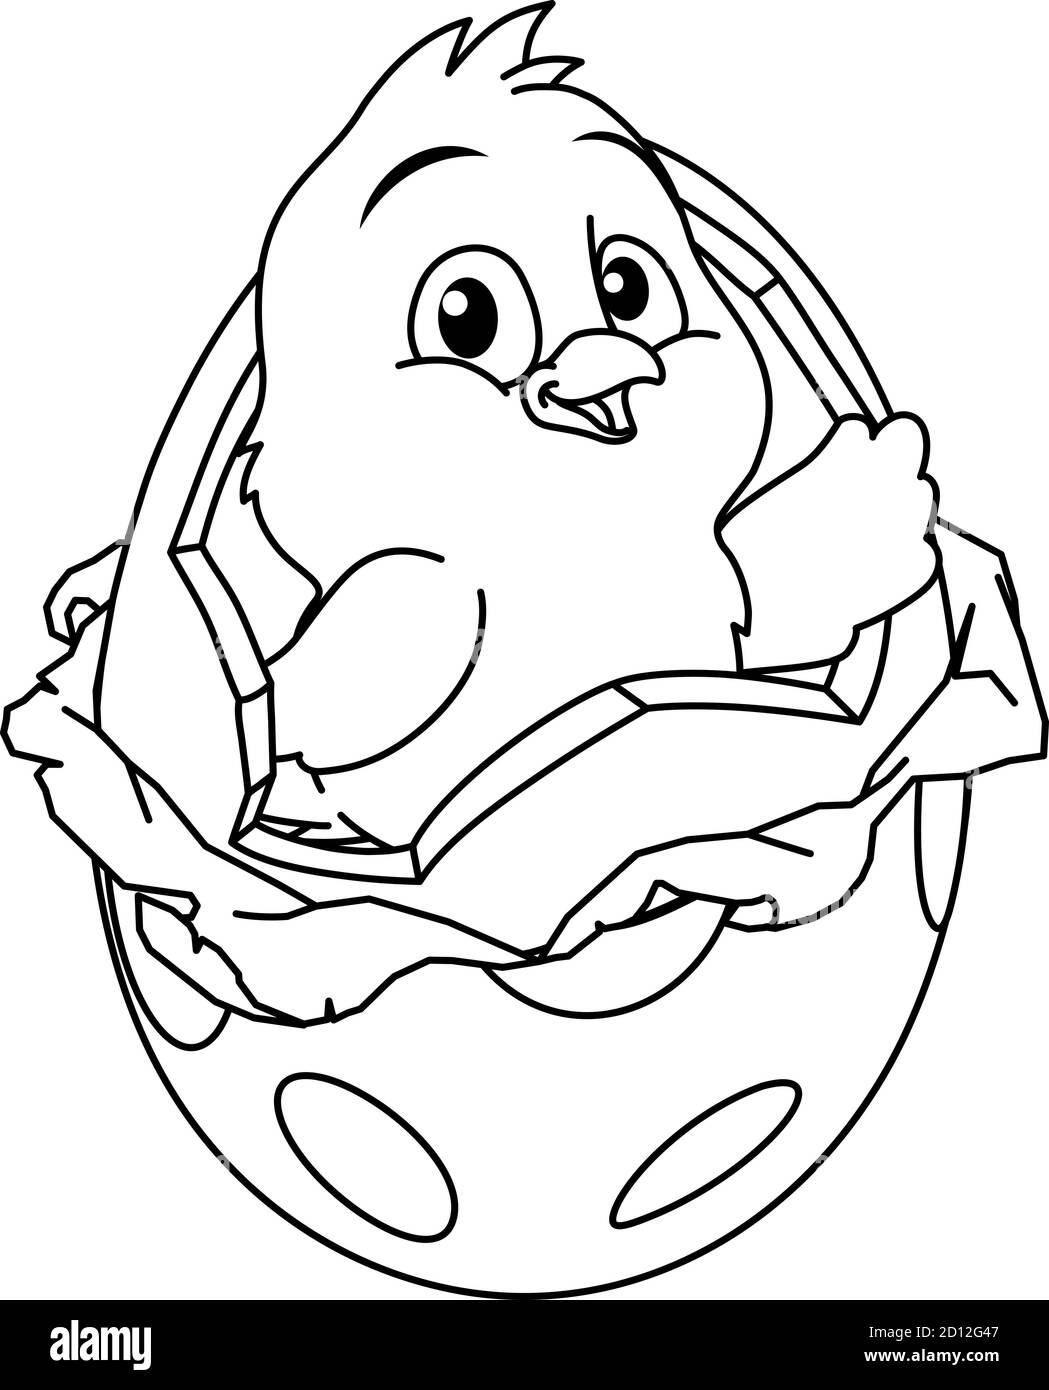 Easter Chick Egg Coloring Book Page Cartoon Stock Vector